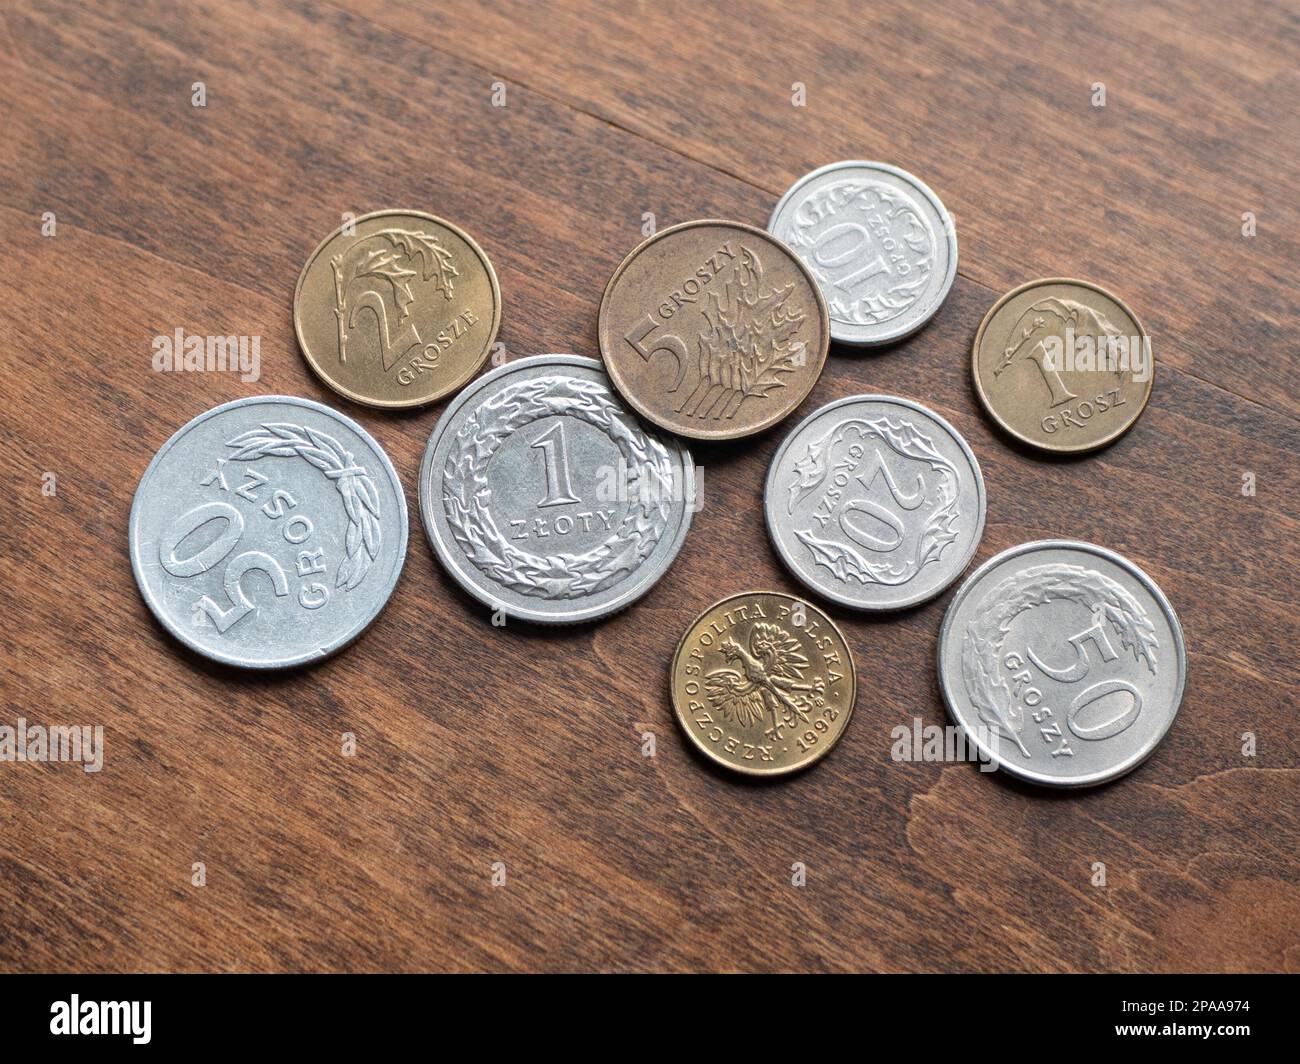 Polish metallic money on wooden table, close up. Zloty and groszy coins, selective focus Stock Photo